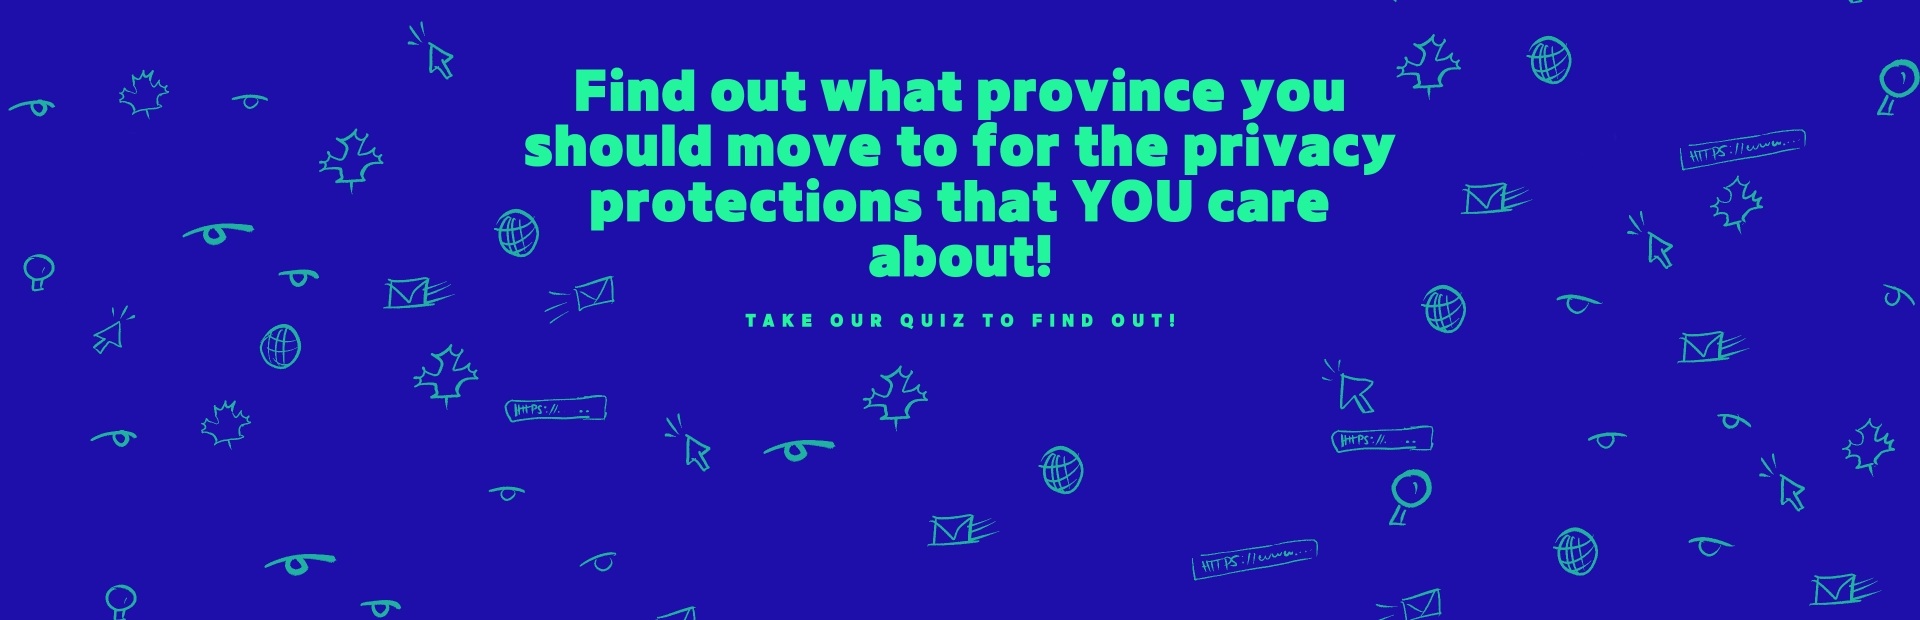 Find out what province you should move to to get the privacy protections you care about.